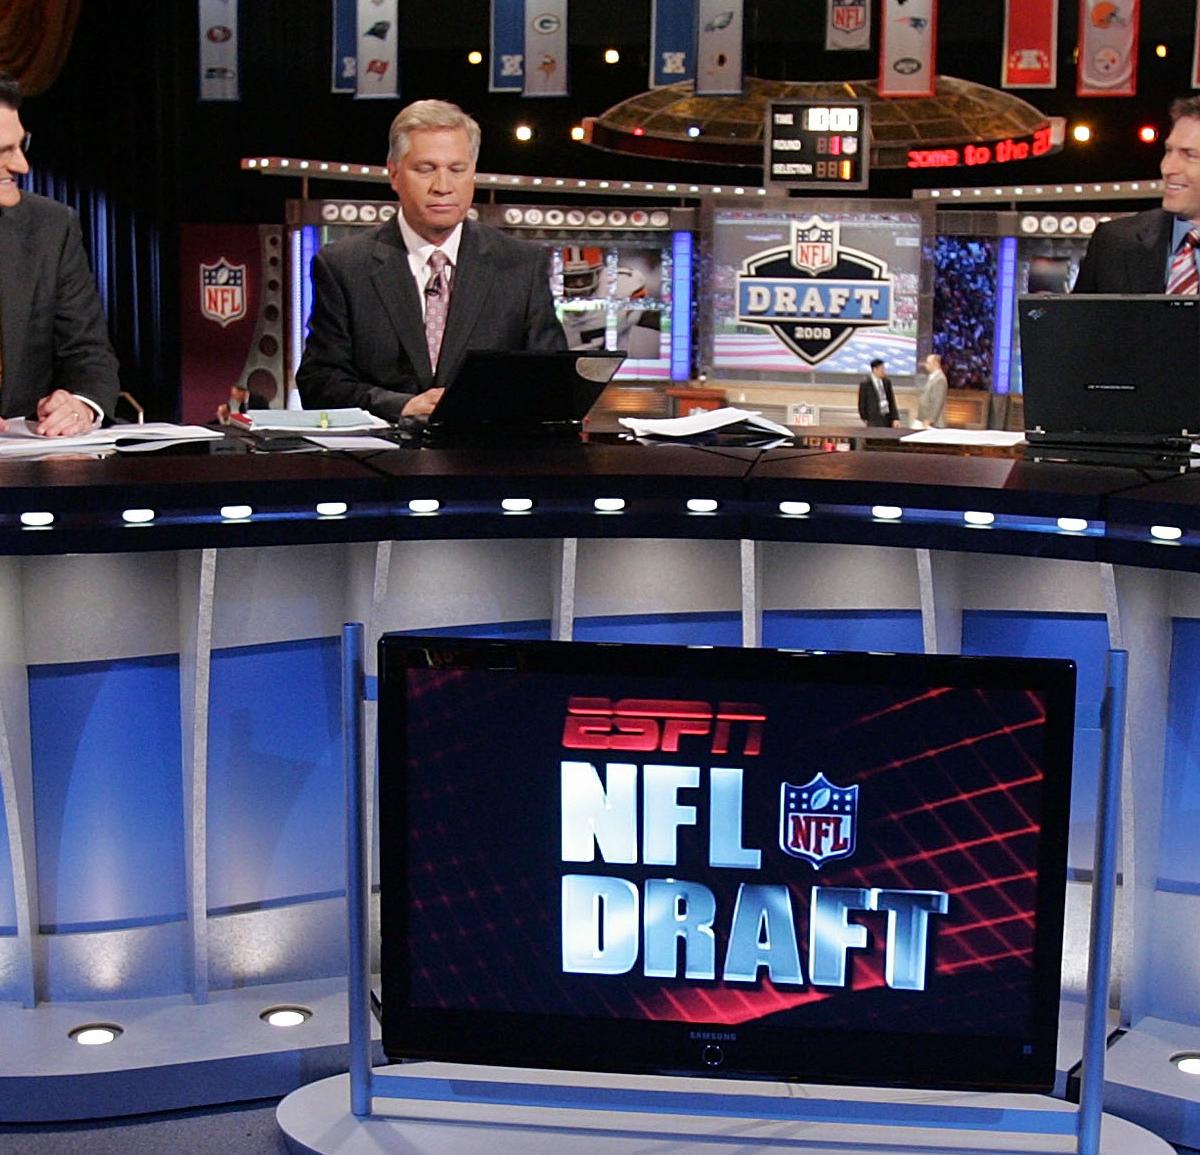 Who Was the Most Accurate NFL Draft Expert This Year?